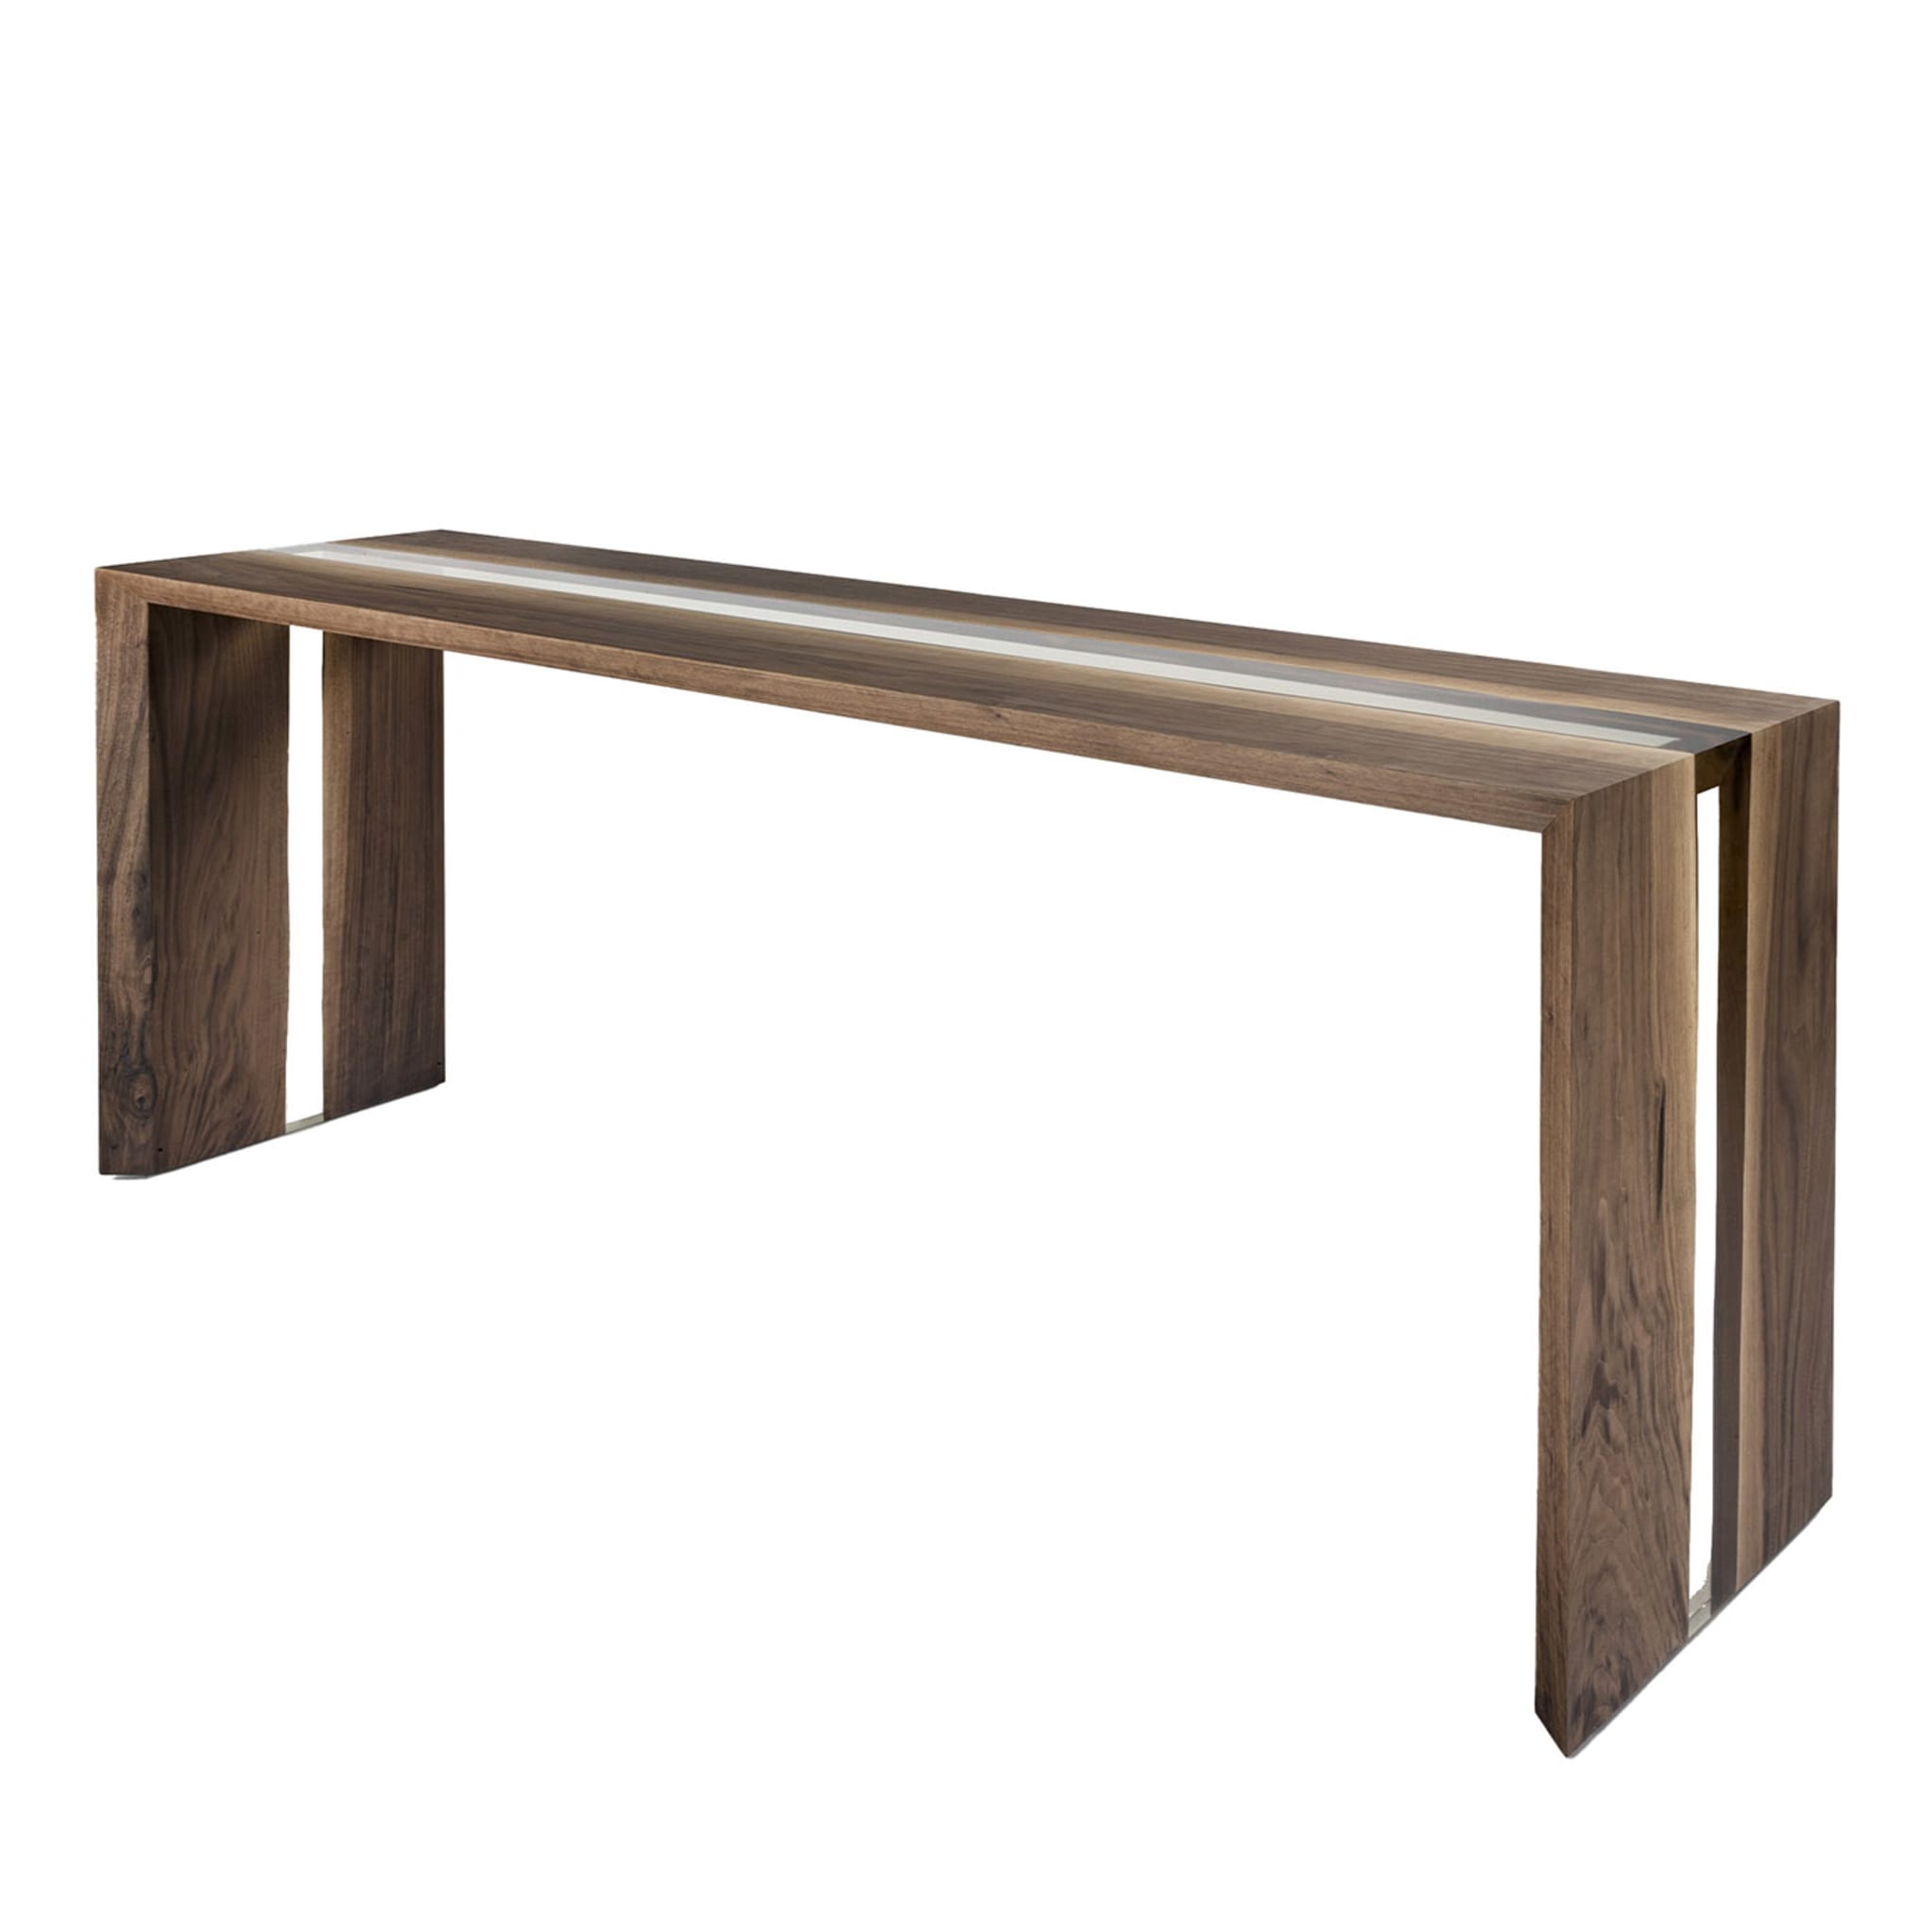 Frame Resin Walnut Console by C.R. & S. Riva 1920 - Main view